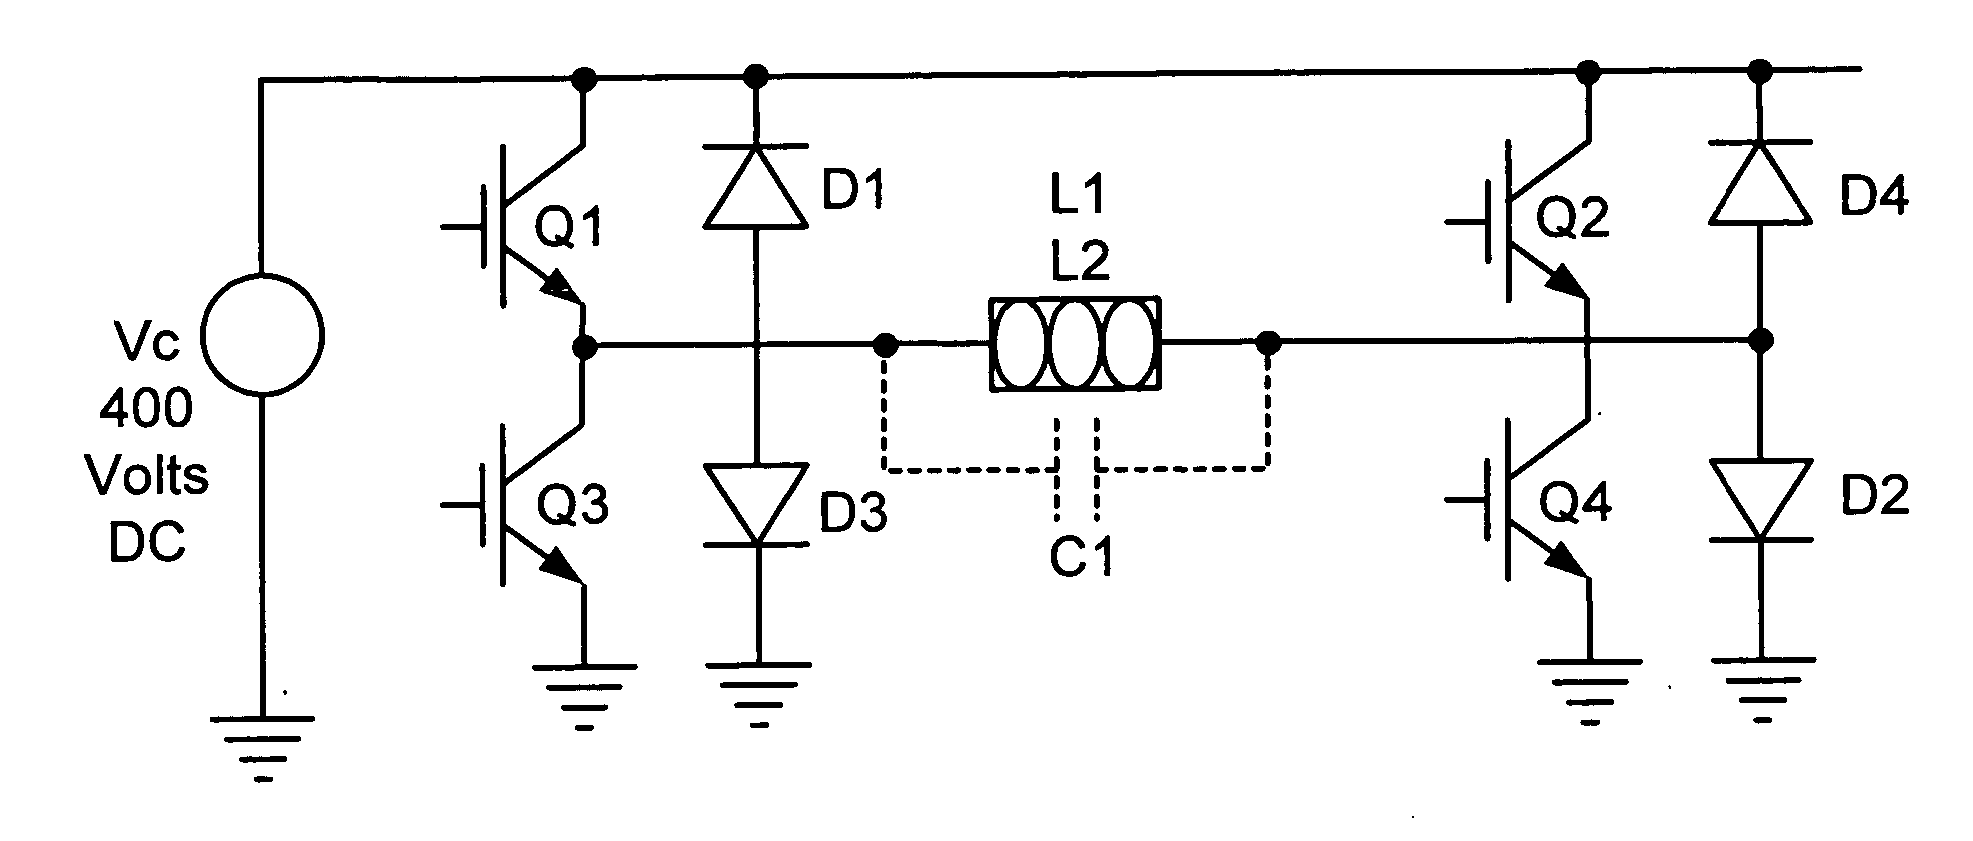 Power driving circuit for controlling a variable load ultrasonic transducer